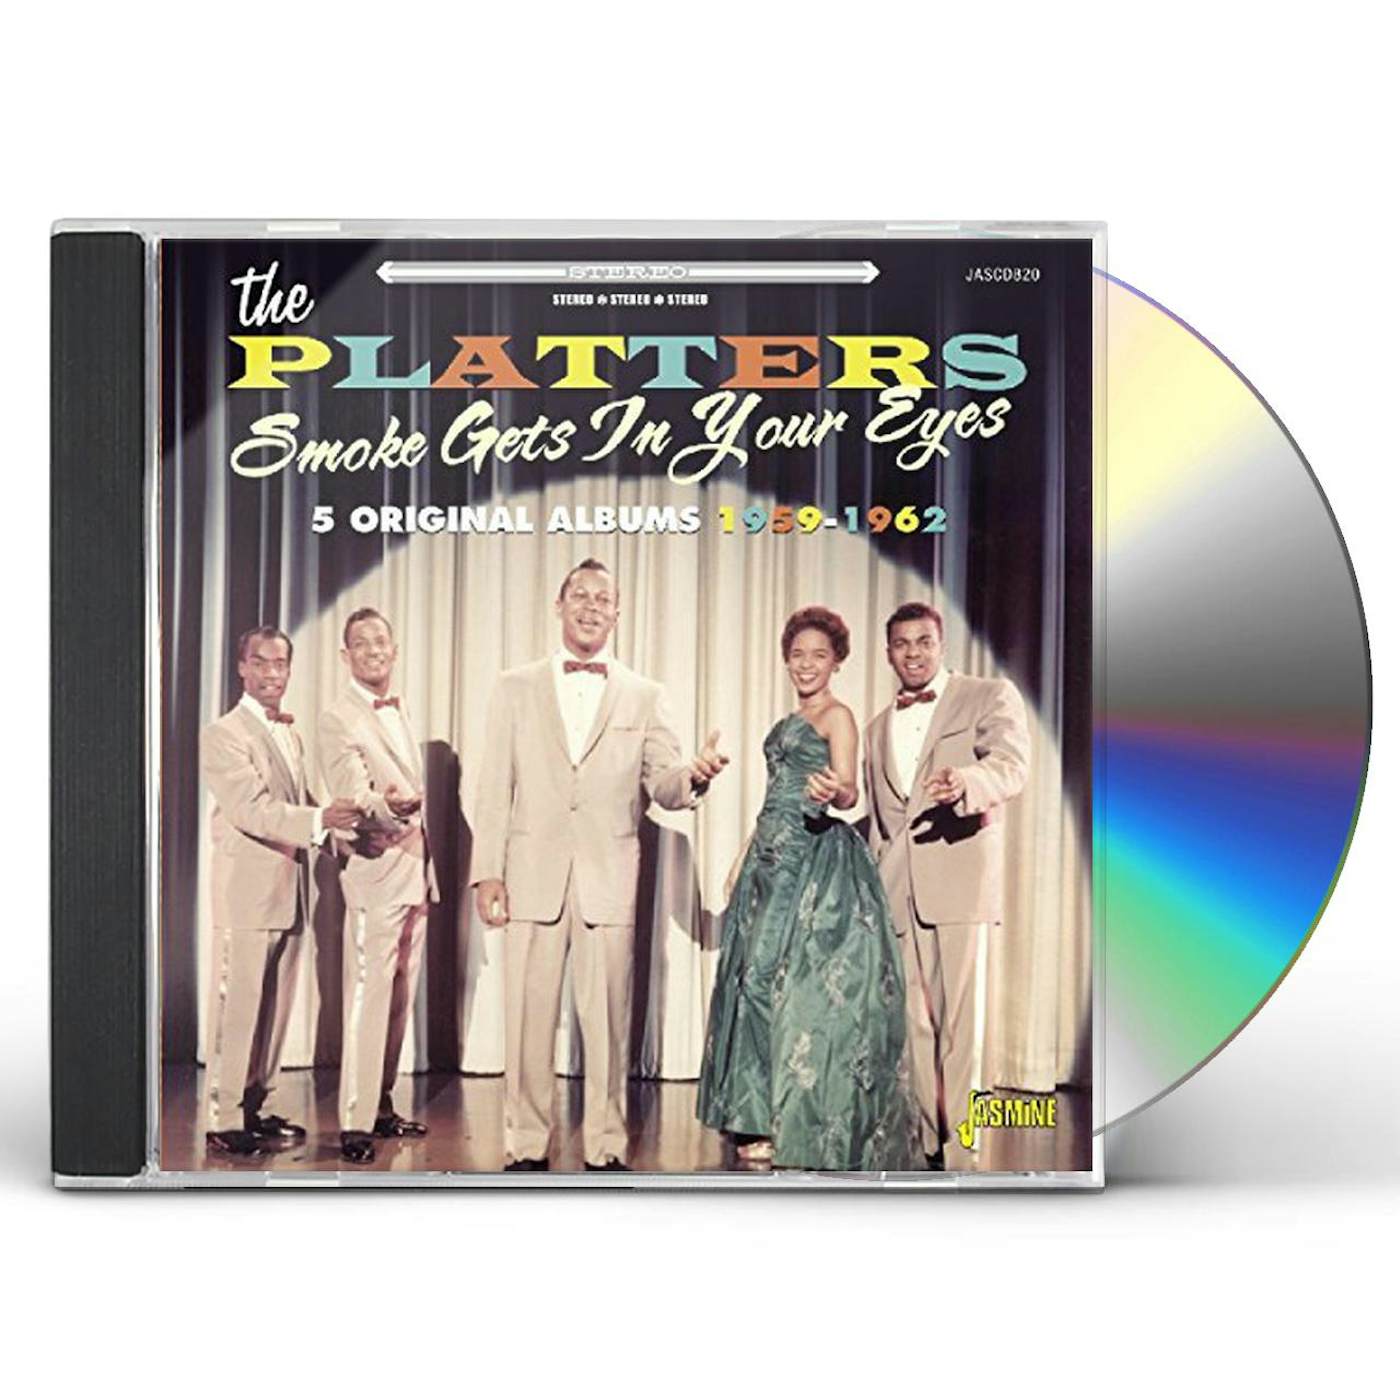 The Platters SMOKE GETS IN YOUR EYES: 5 ORIGINAL ALBUMS 1959-62 CD